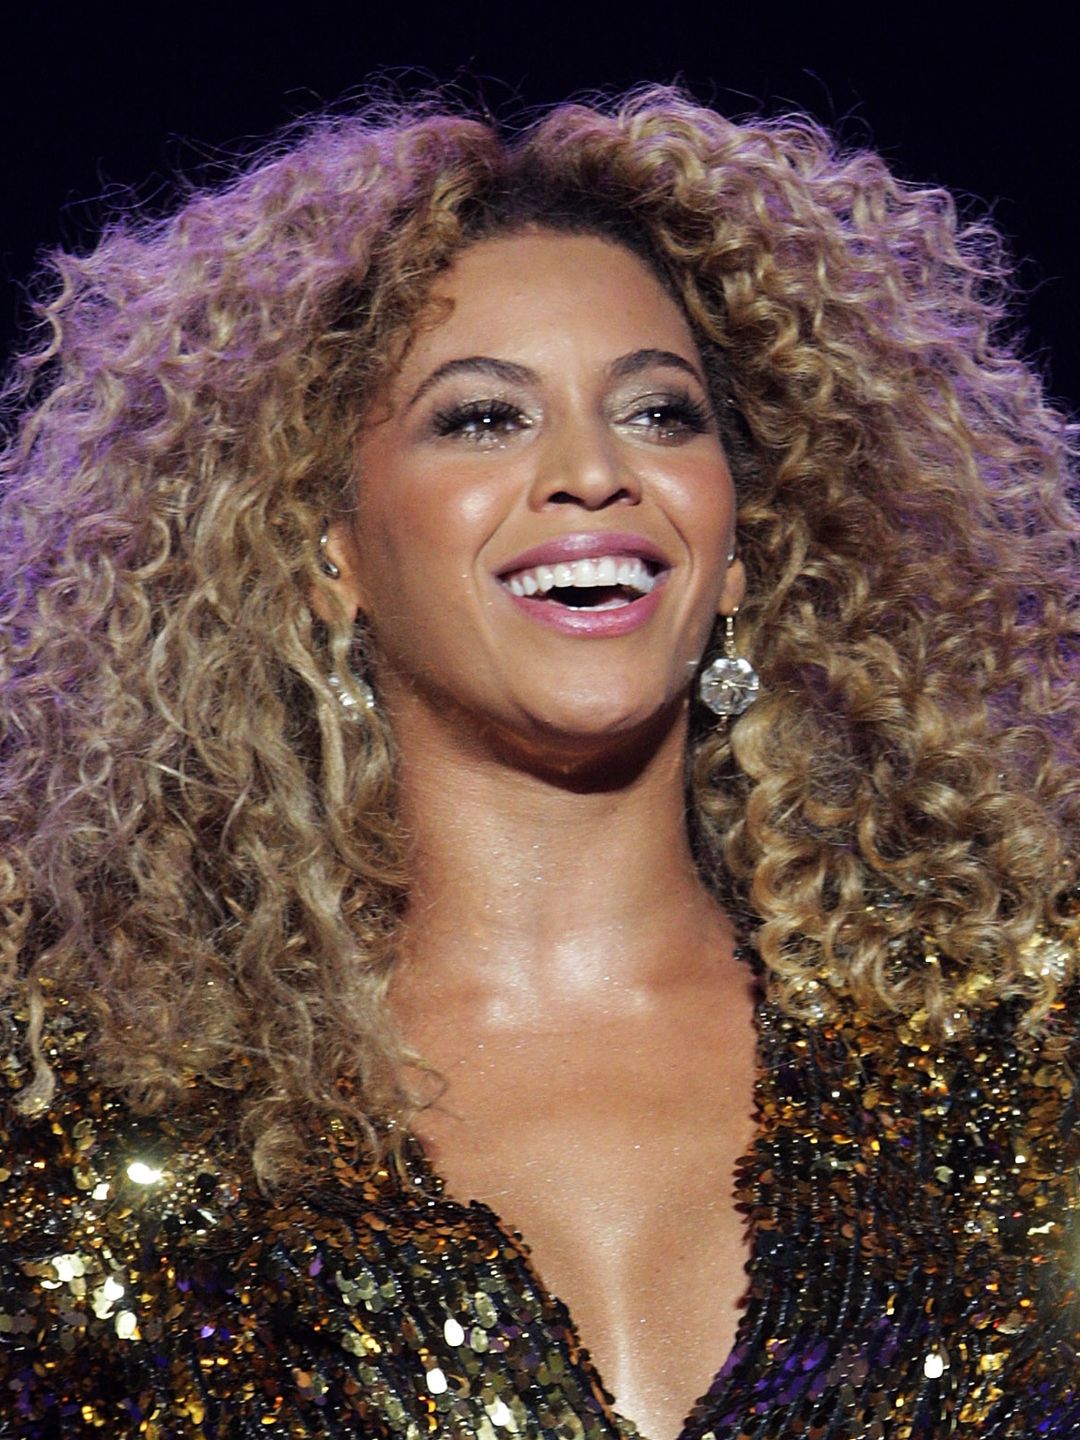 Beyonce with shimmery eyeshadow and golden blonde curls 